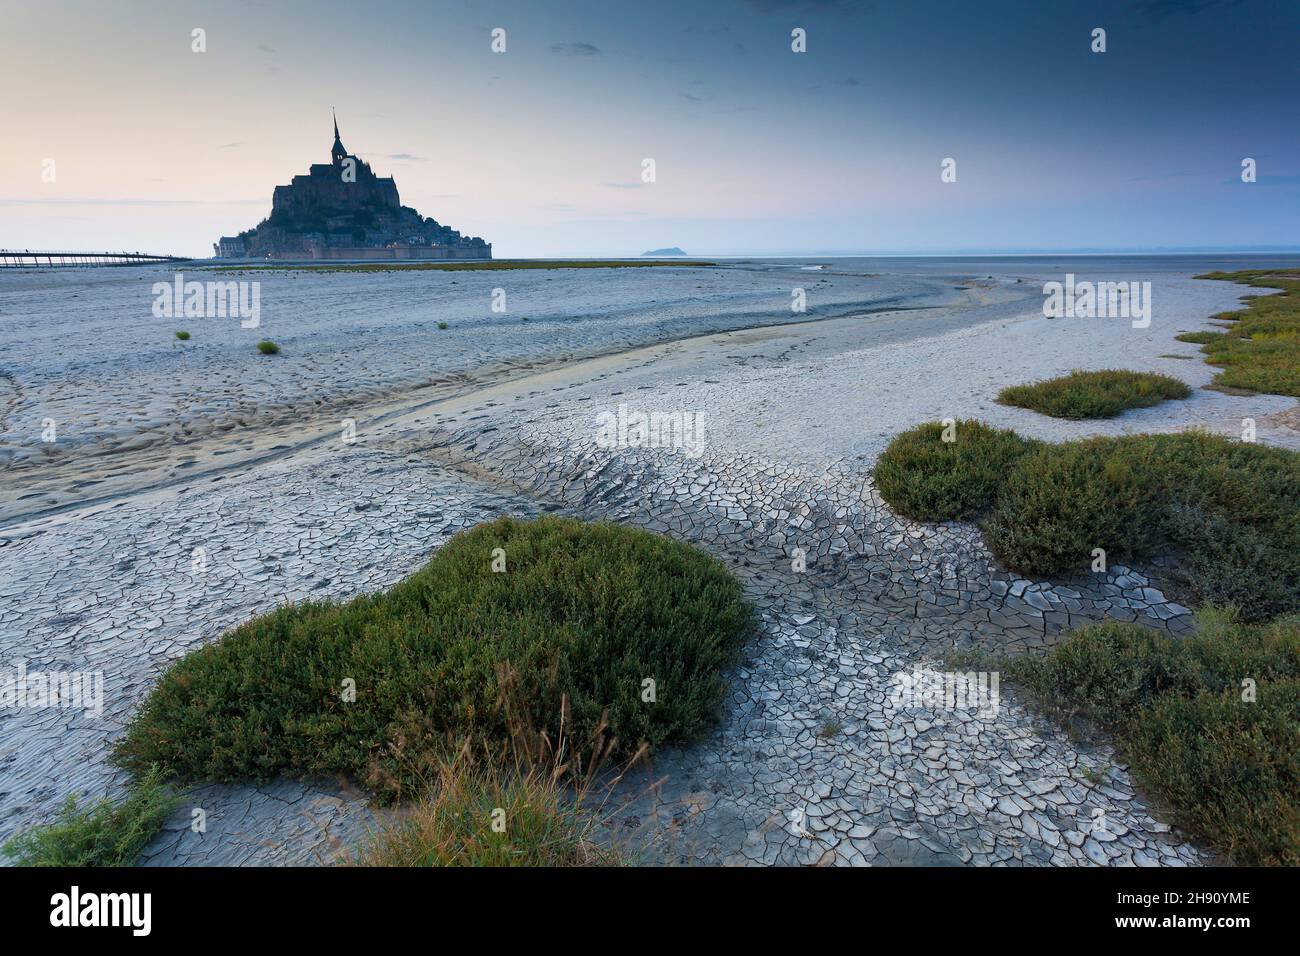 Bay of Le Mont St Michel, Normandy, France. Stock Photo